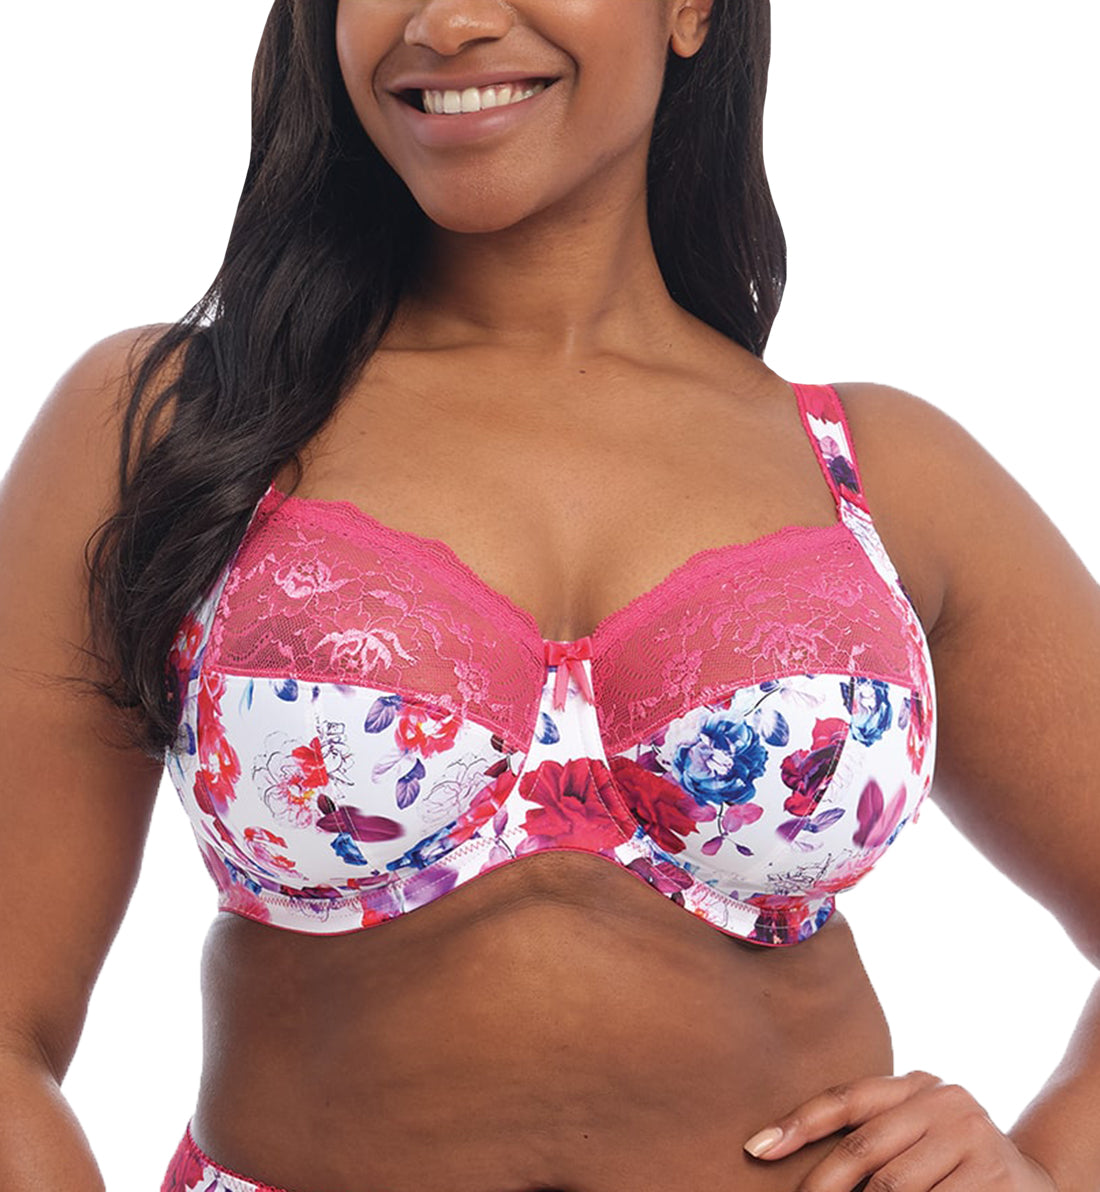 Elomi Morgan Stretch Lace Banded Underwire Bra (4110)- Pink Floral -  Breakout Bras